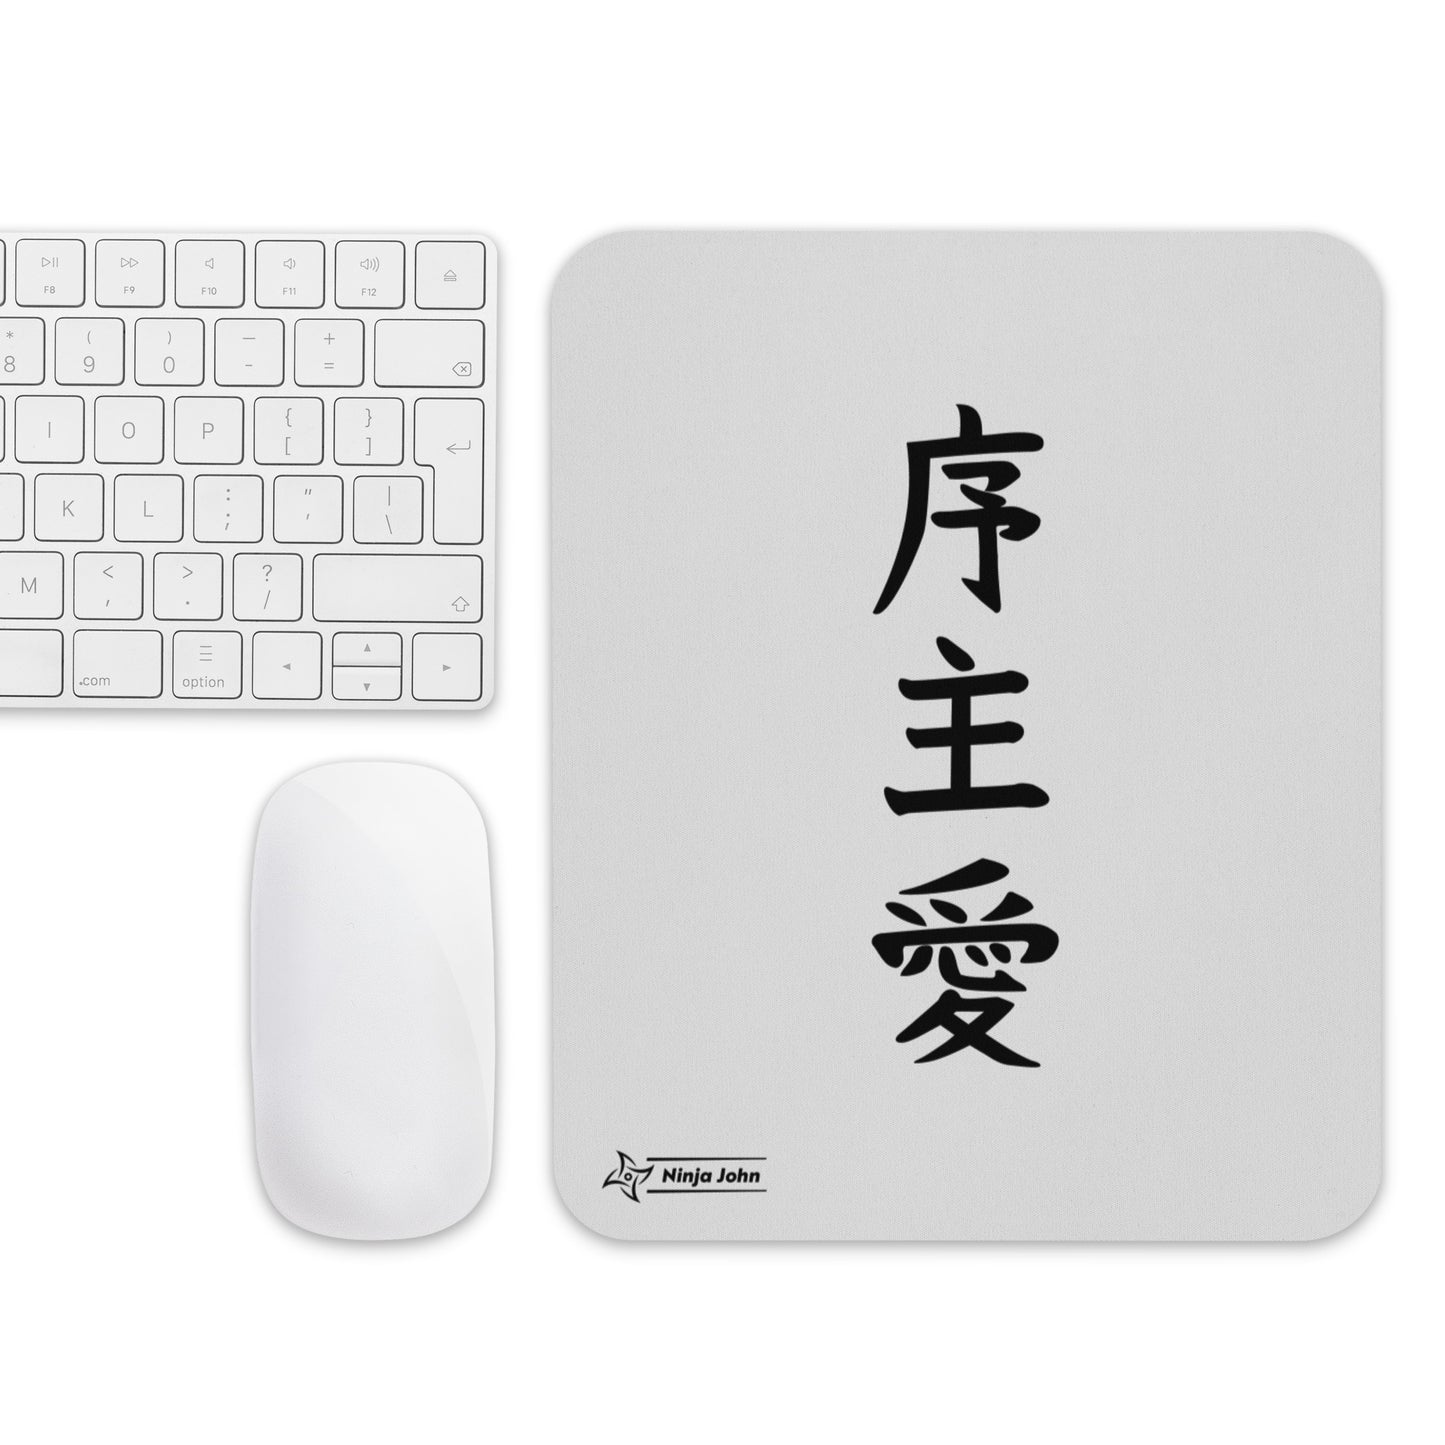 "Joshua" in Japanese Kanji, Mouse pad (Light color, Top to bottom writing)